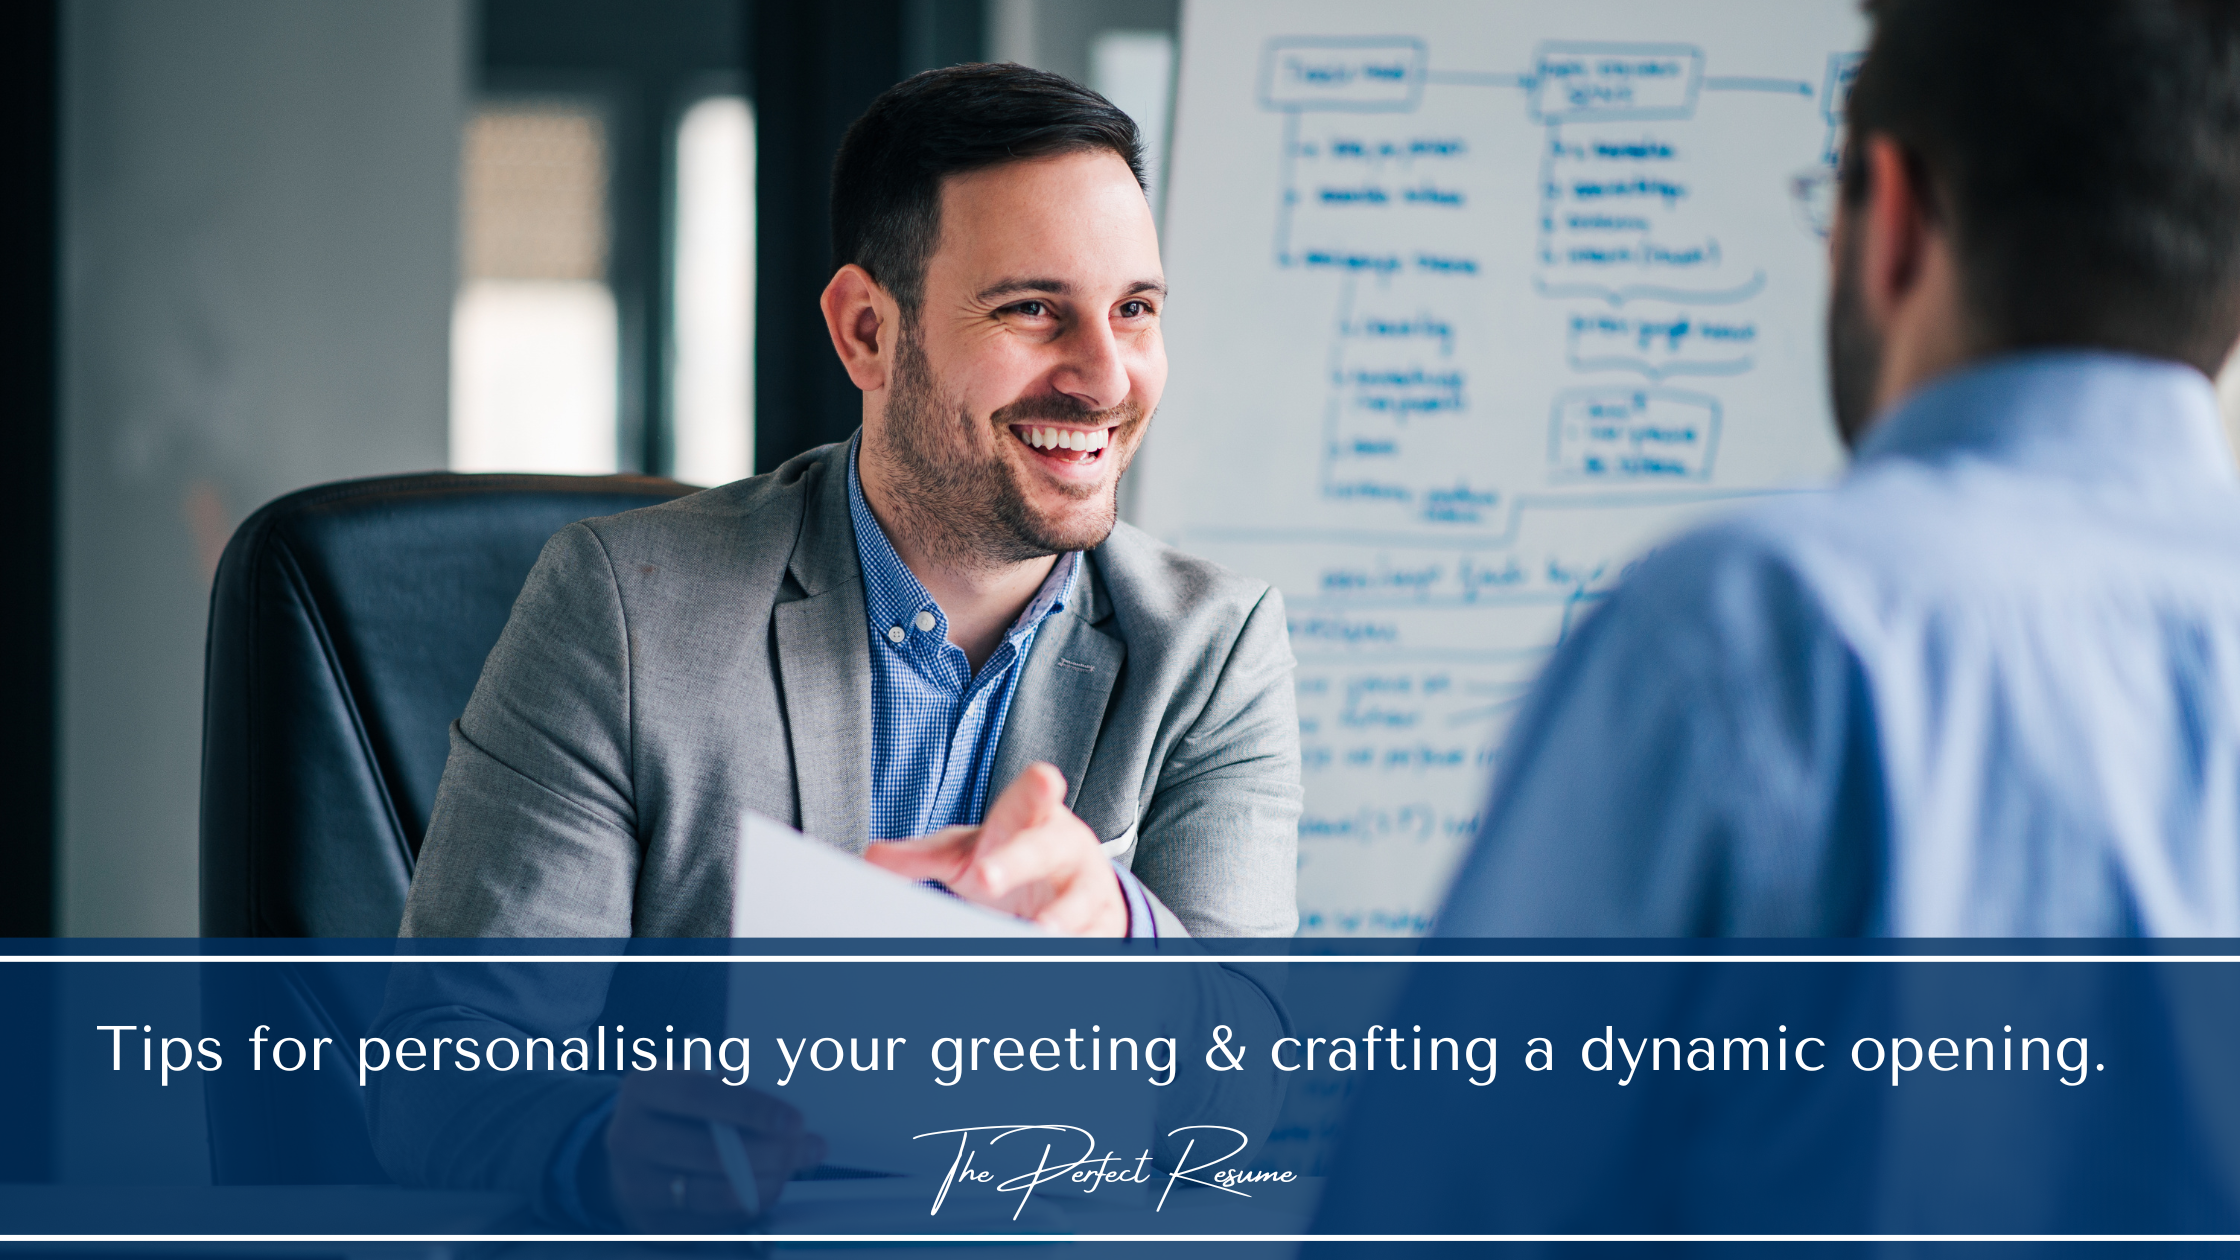 Tips for personalising your greeting & crafting a dynamic opening.